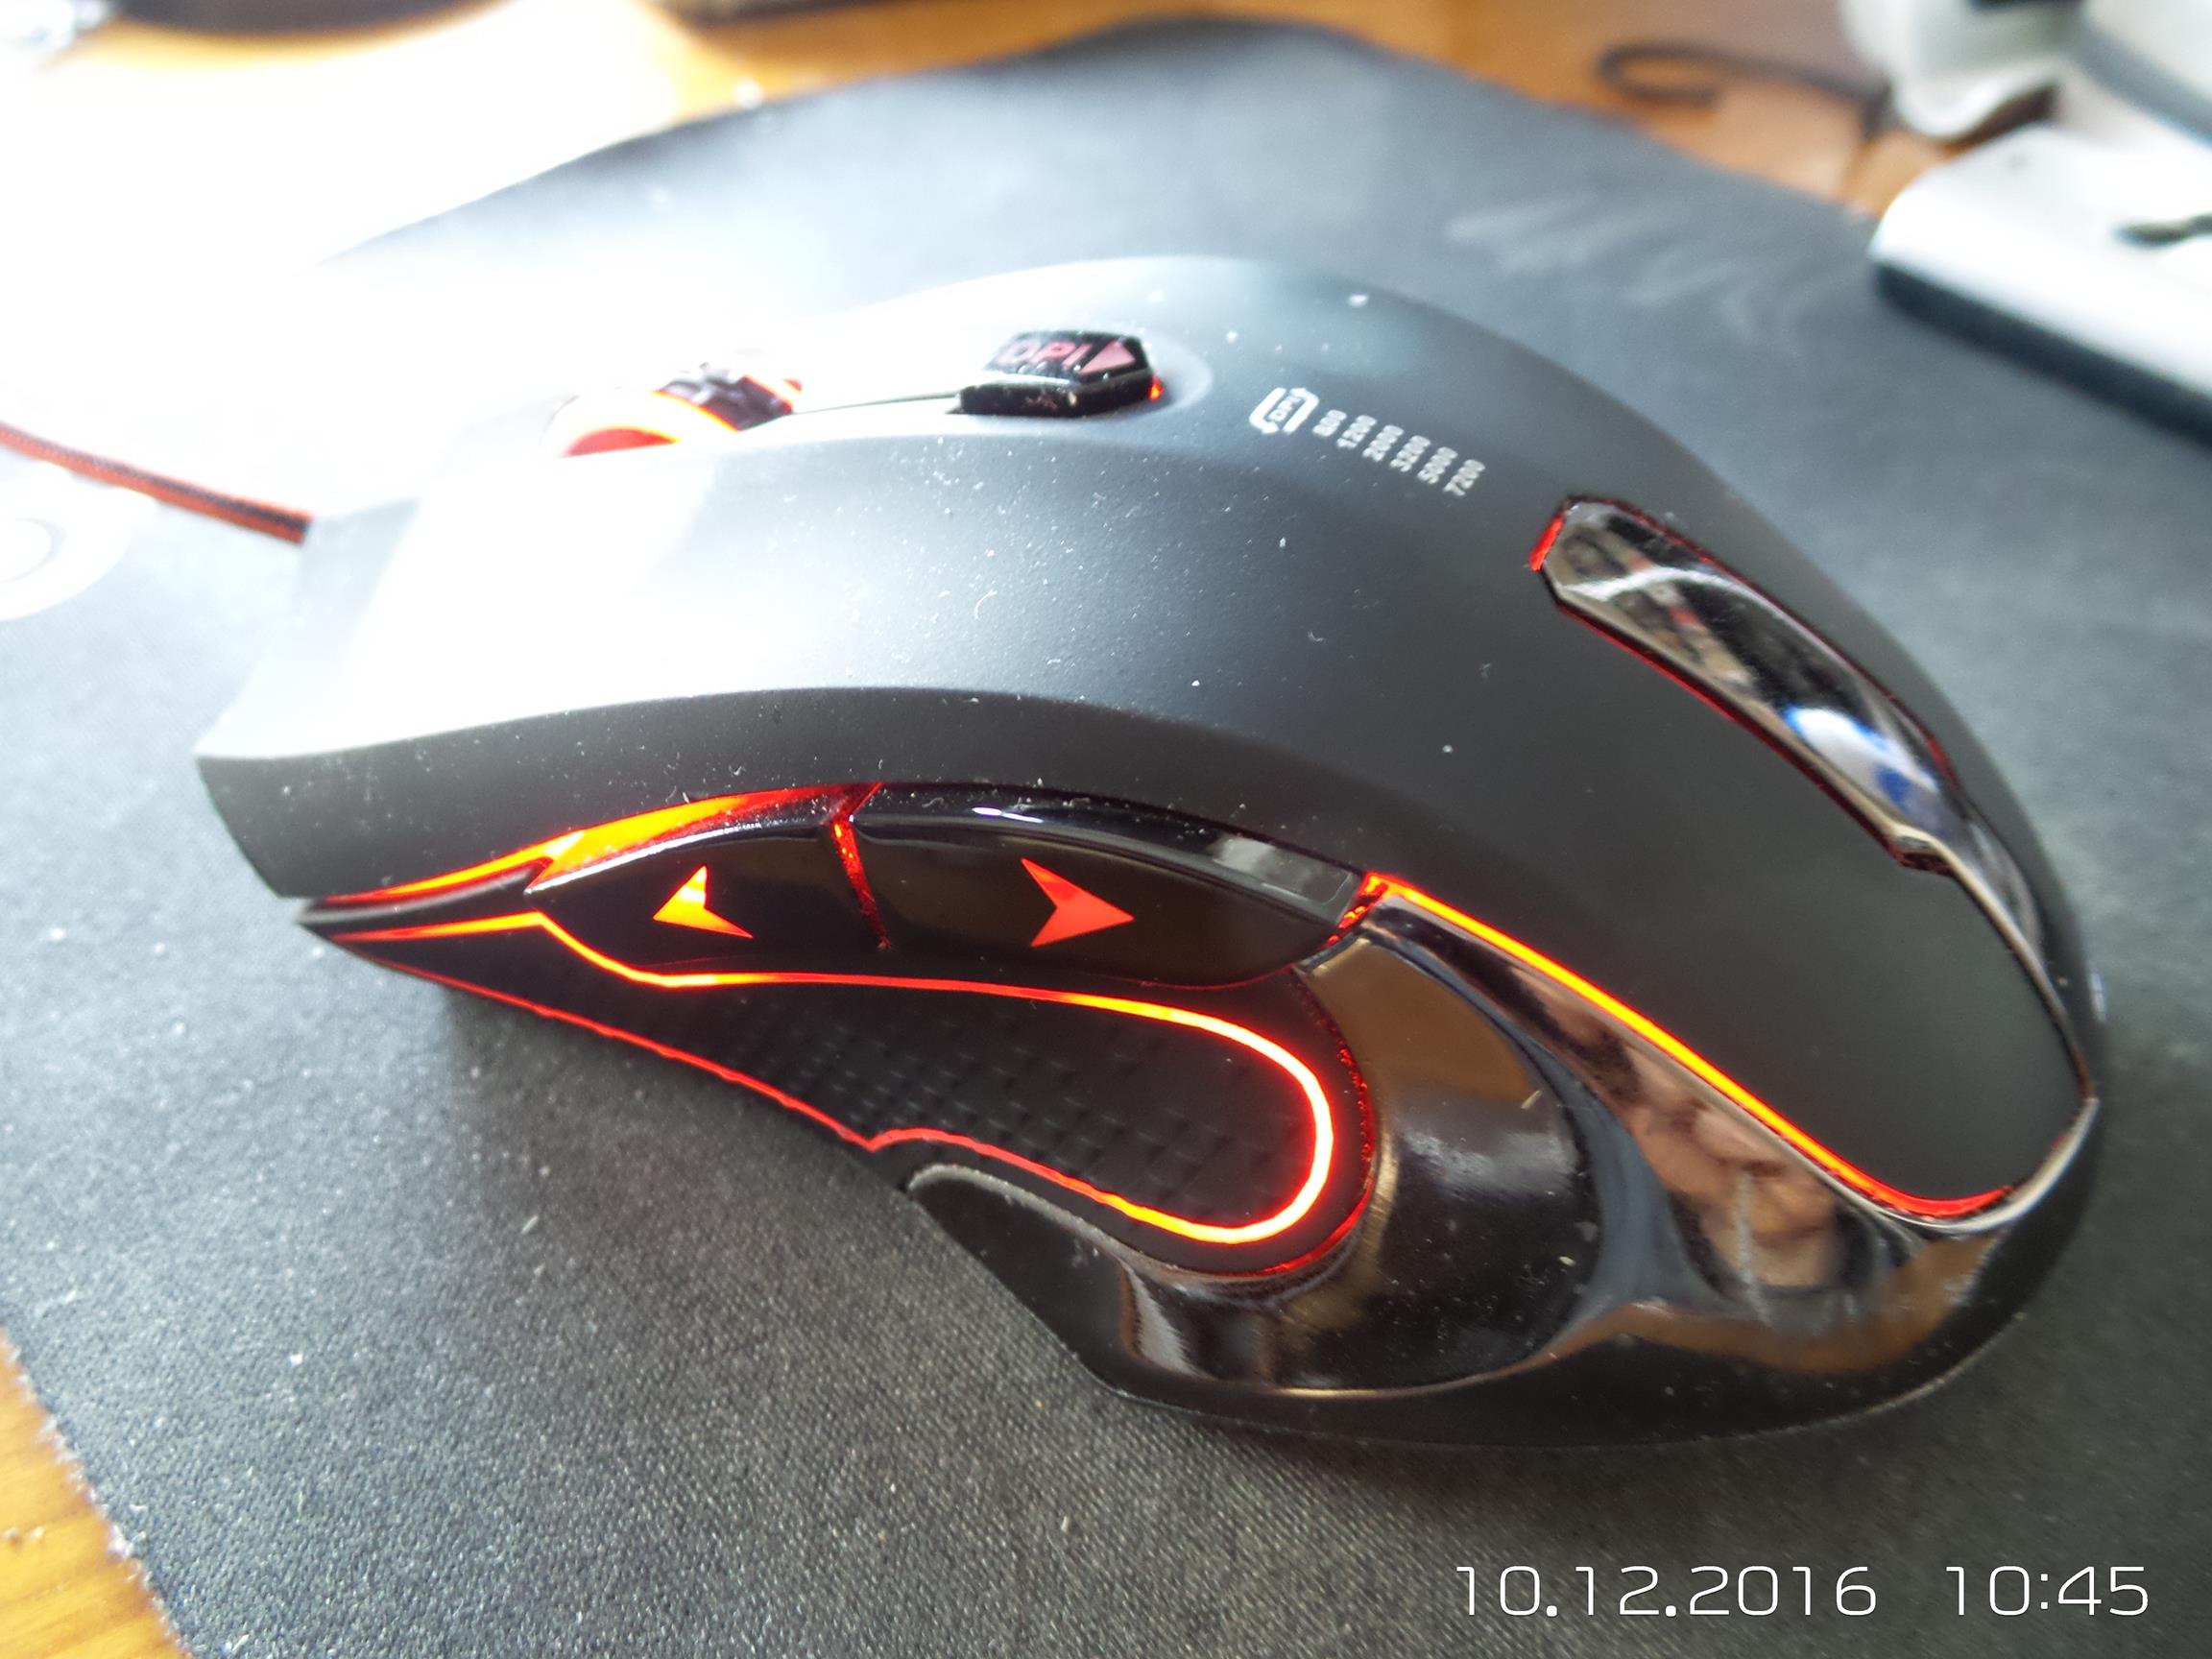 aLLreLi X100 Gaming Mouse Review